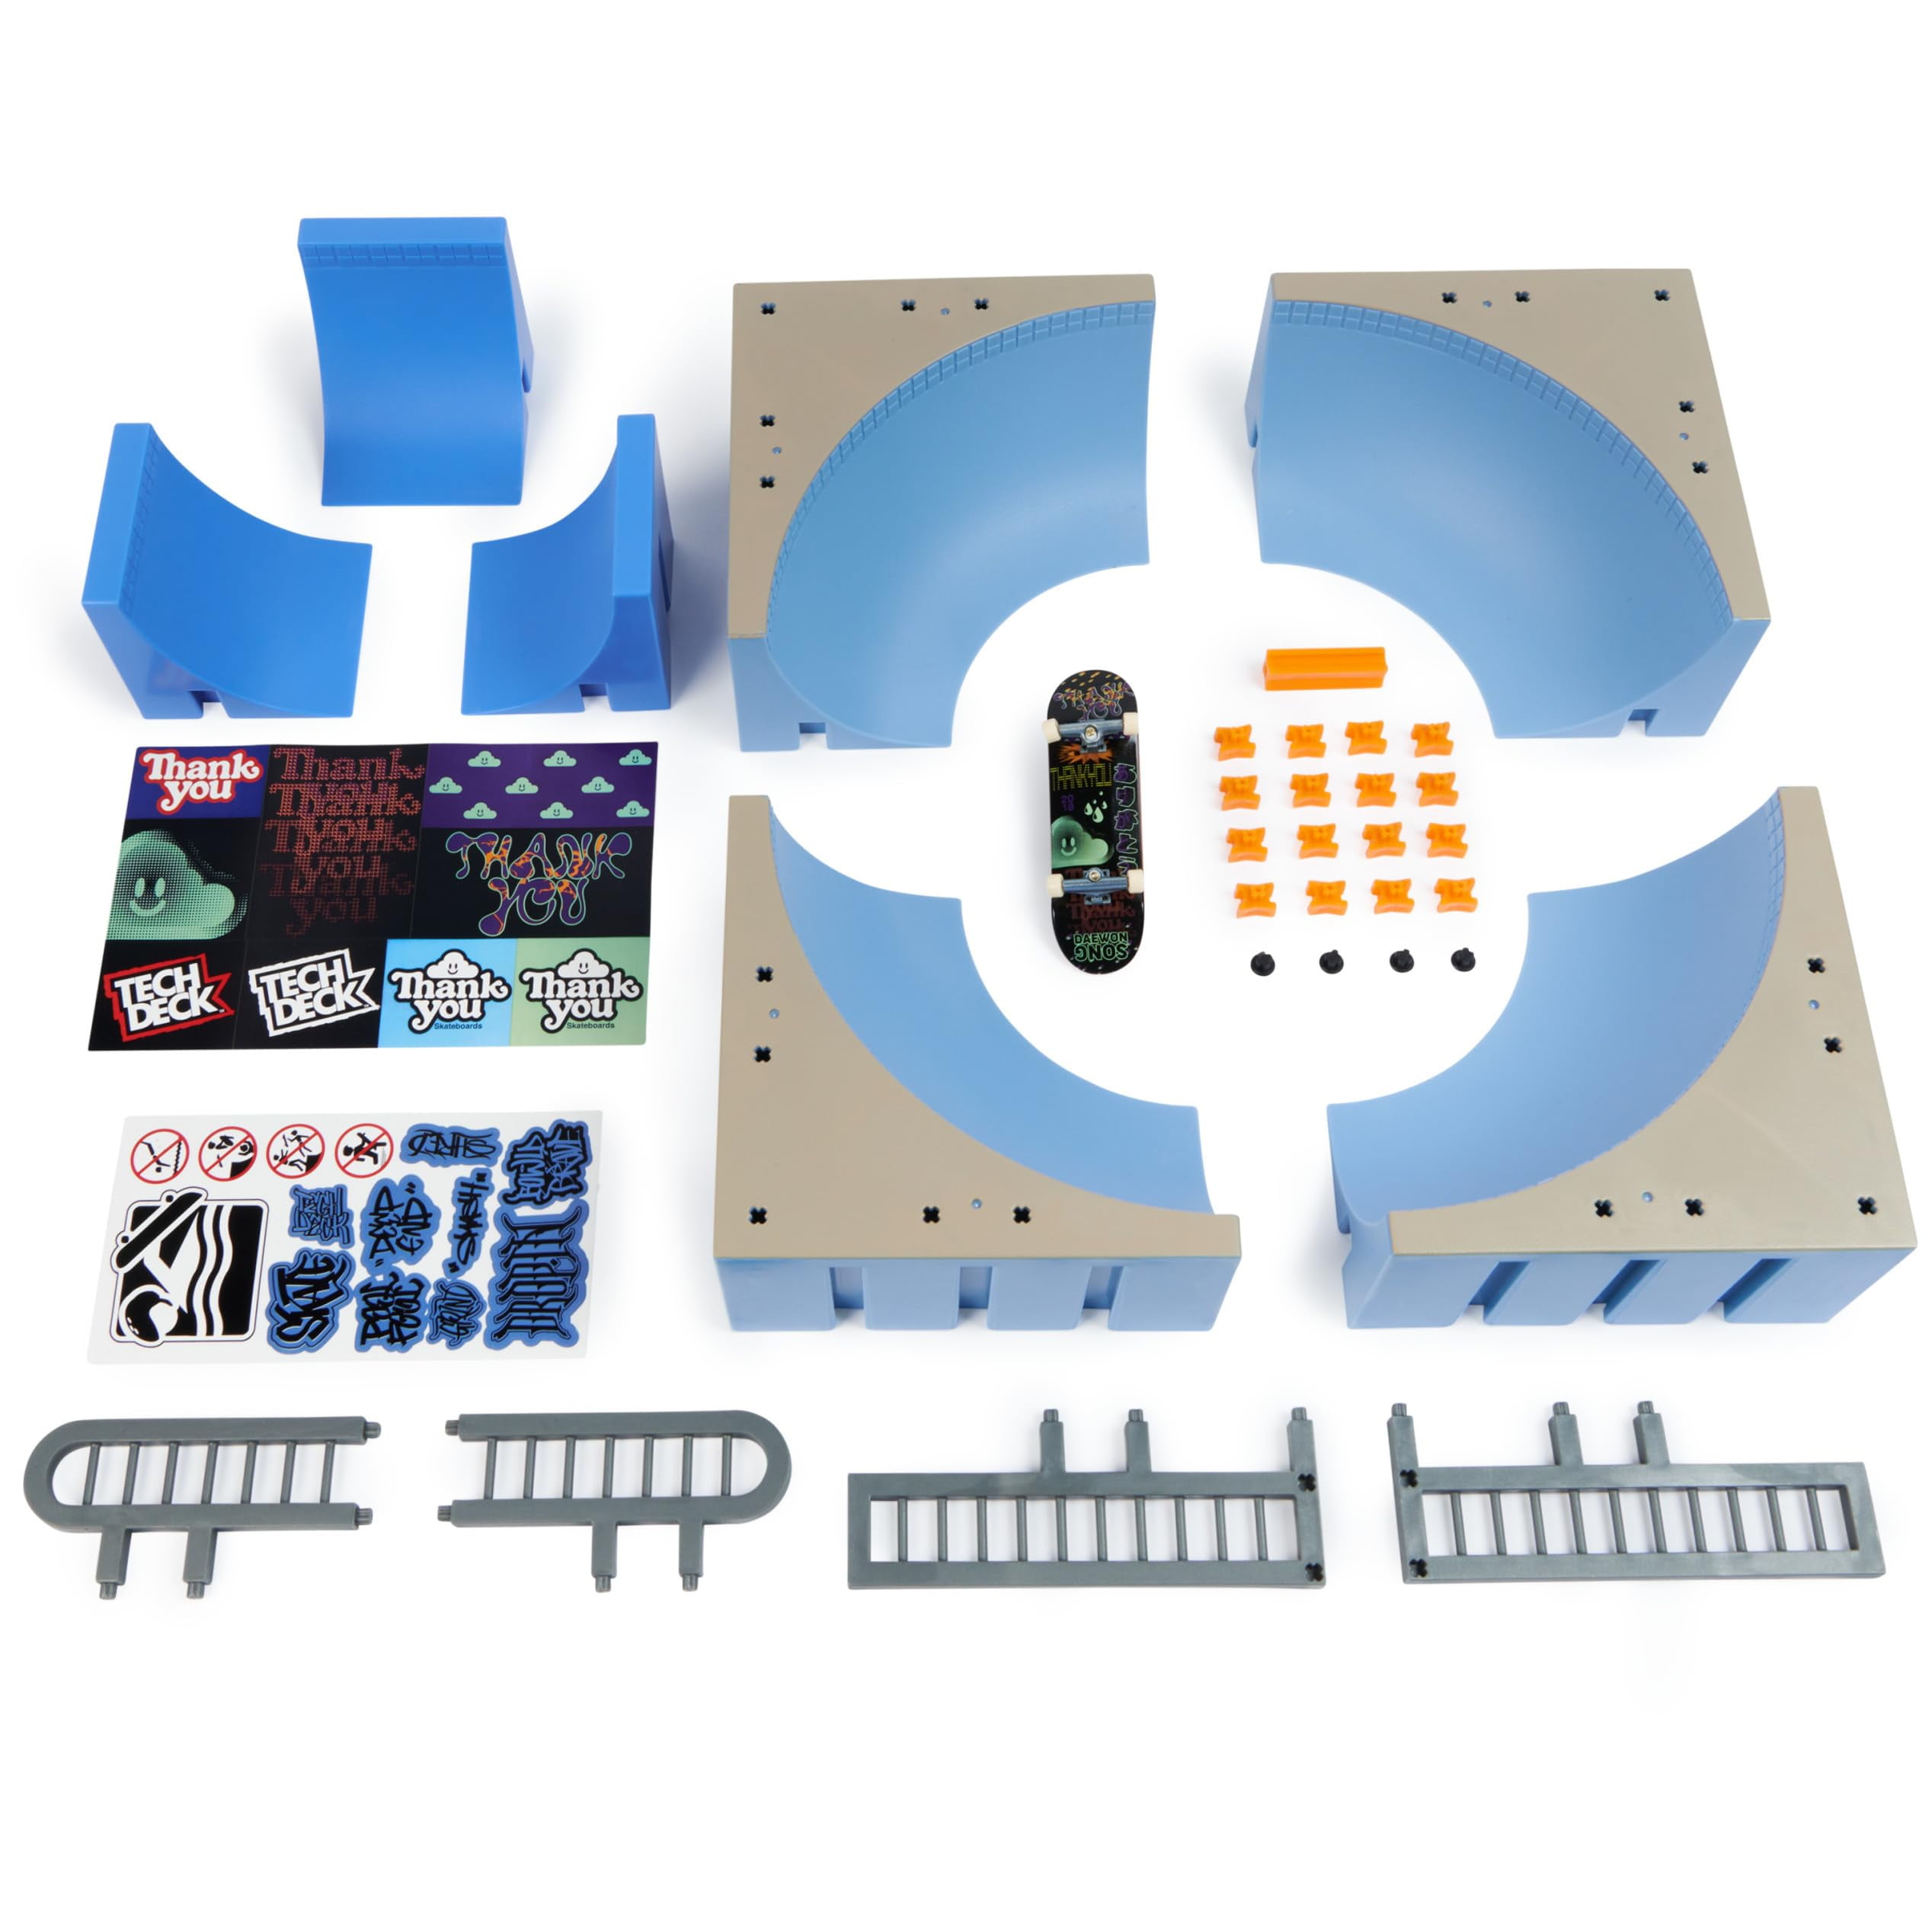  Tech Deck, Bowl Builder X-Connect Park Creator, Customizable  and Buildable Ramp Set with Exclusive Fingerboard, Kids Toy for Ages 6 and  up : Everything Else